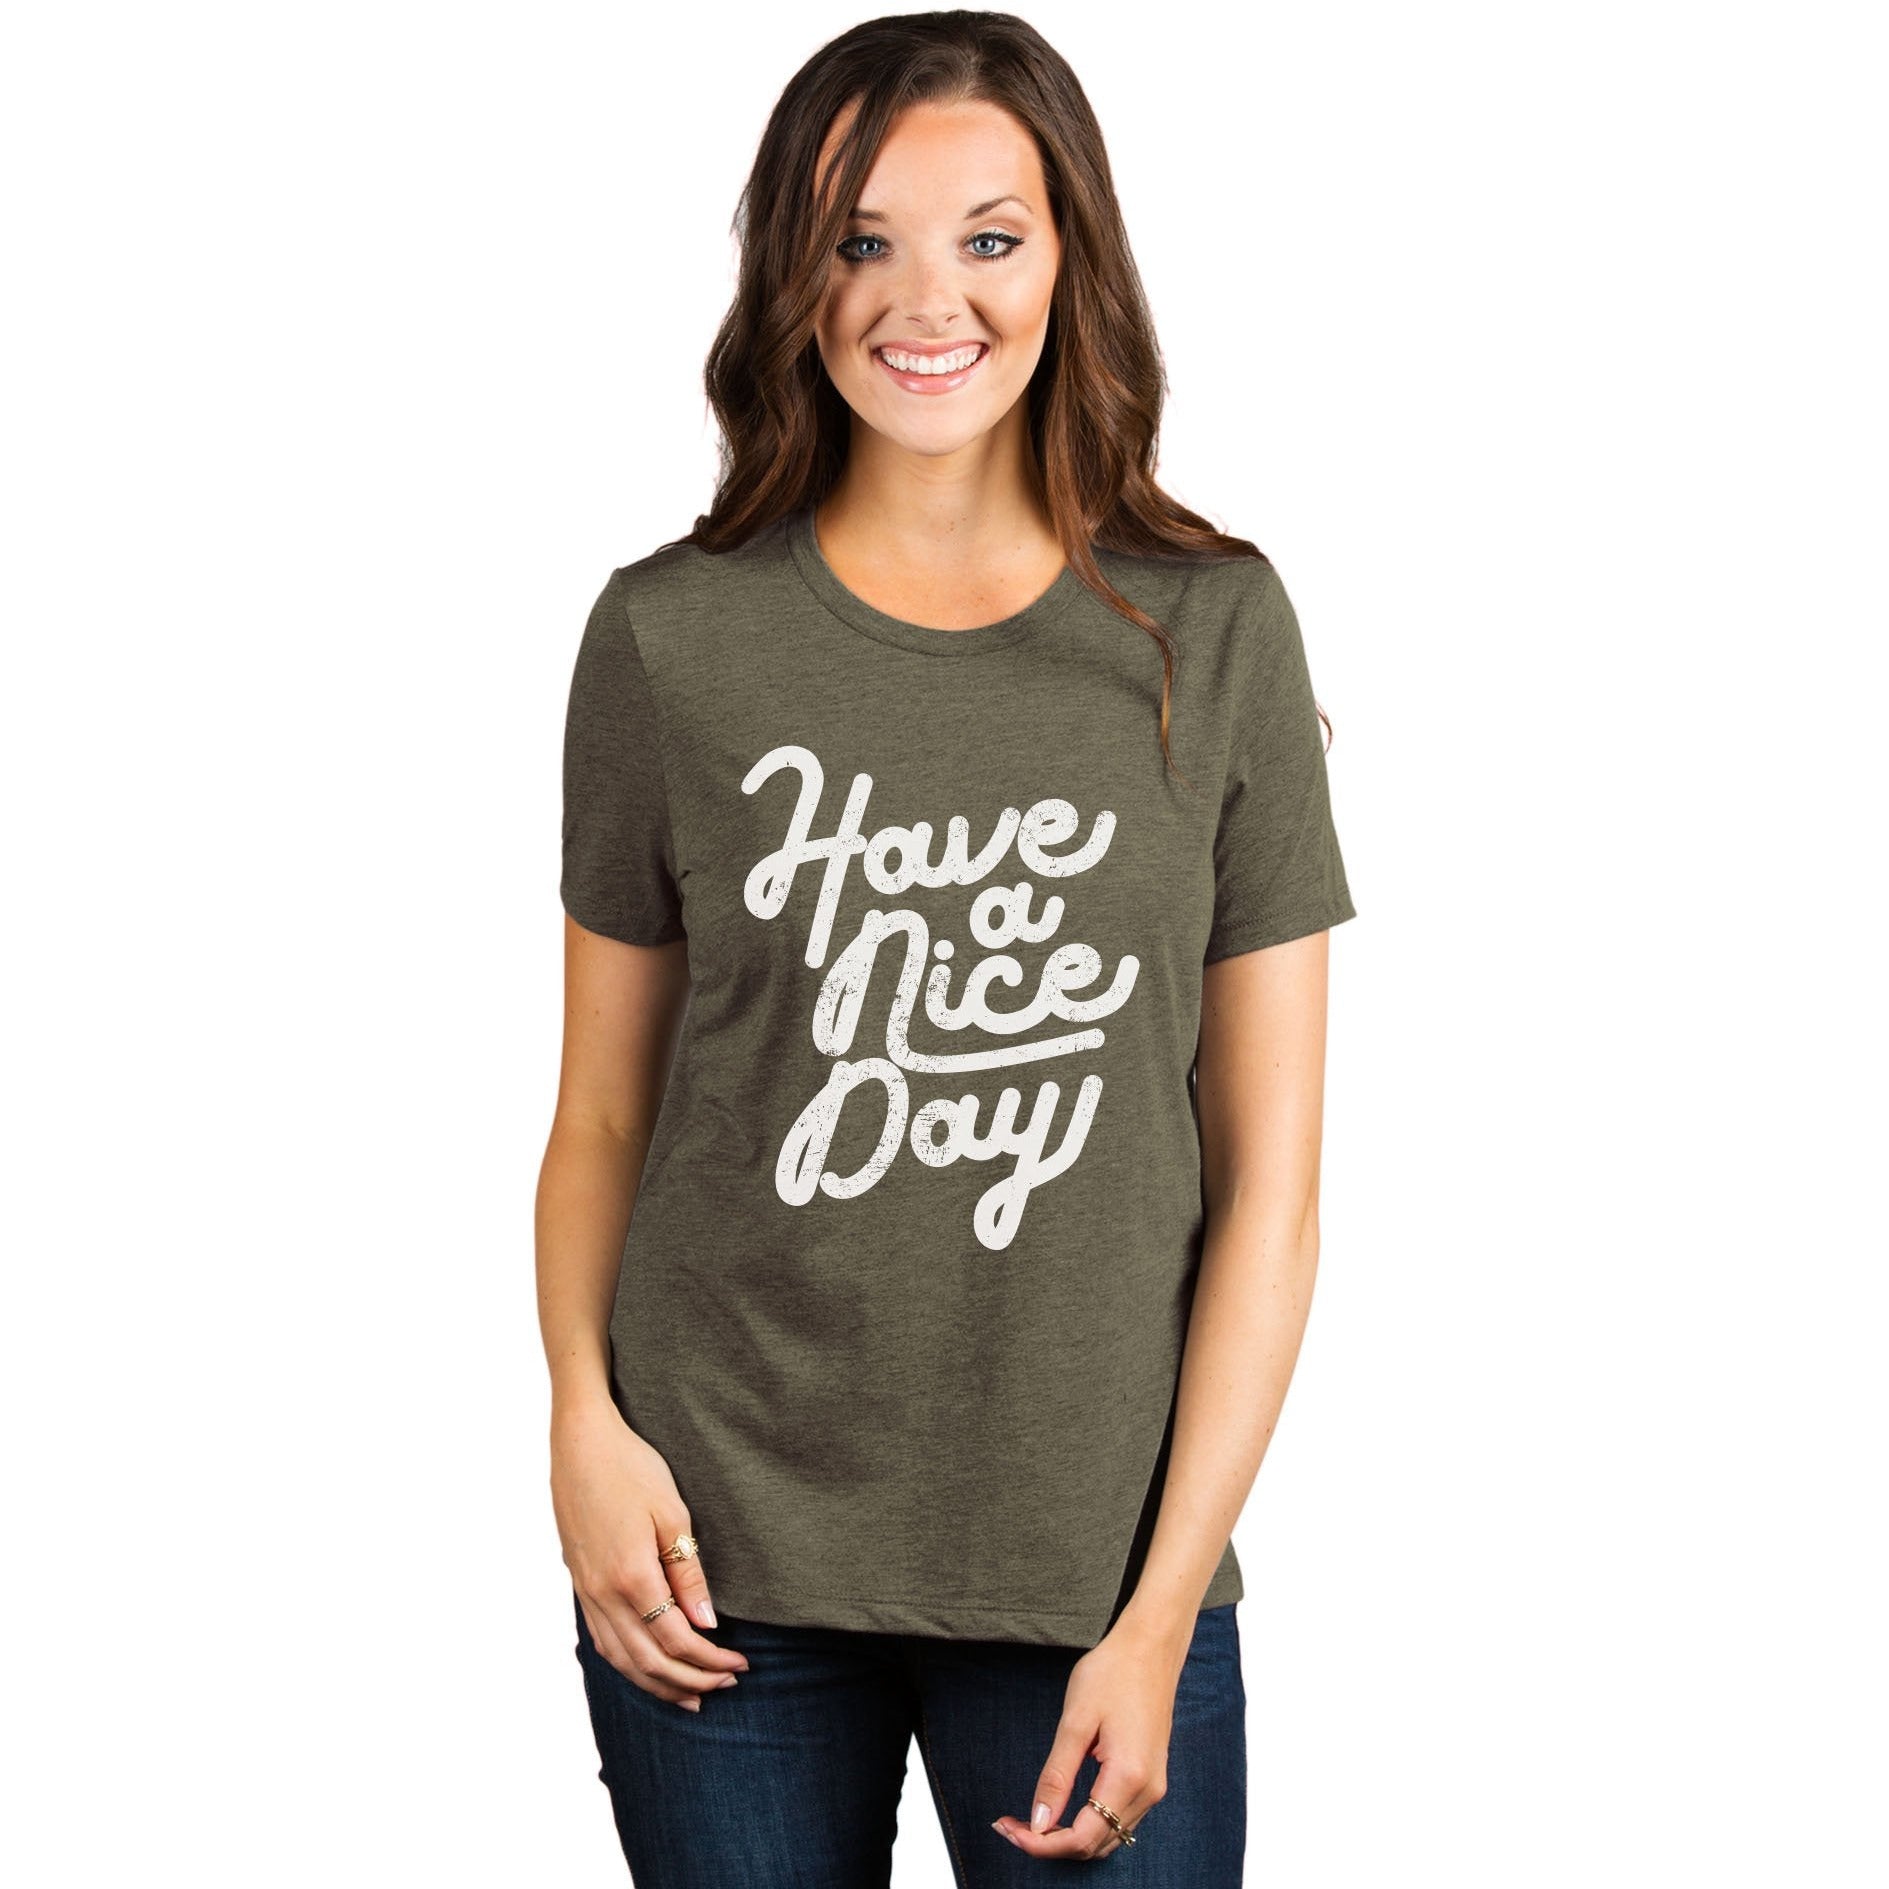 Have A Nice Day Women's Relaxed Crewneck T-Shirt Top Tee Heather Sage